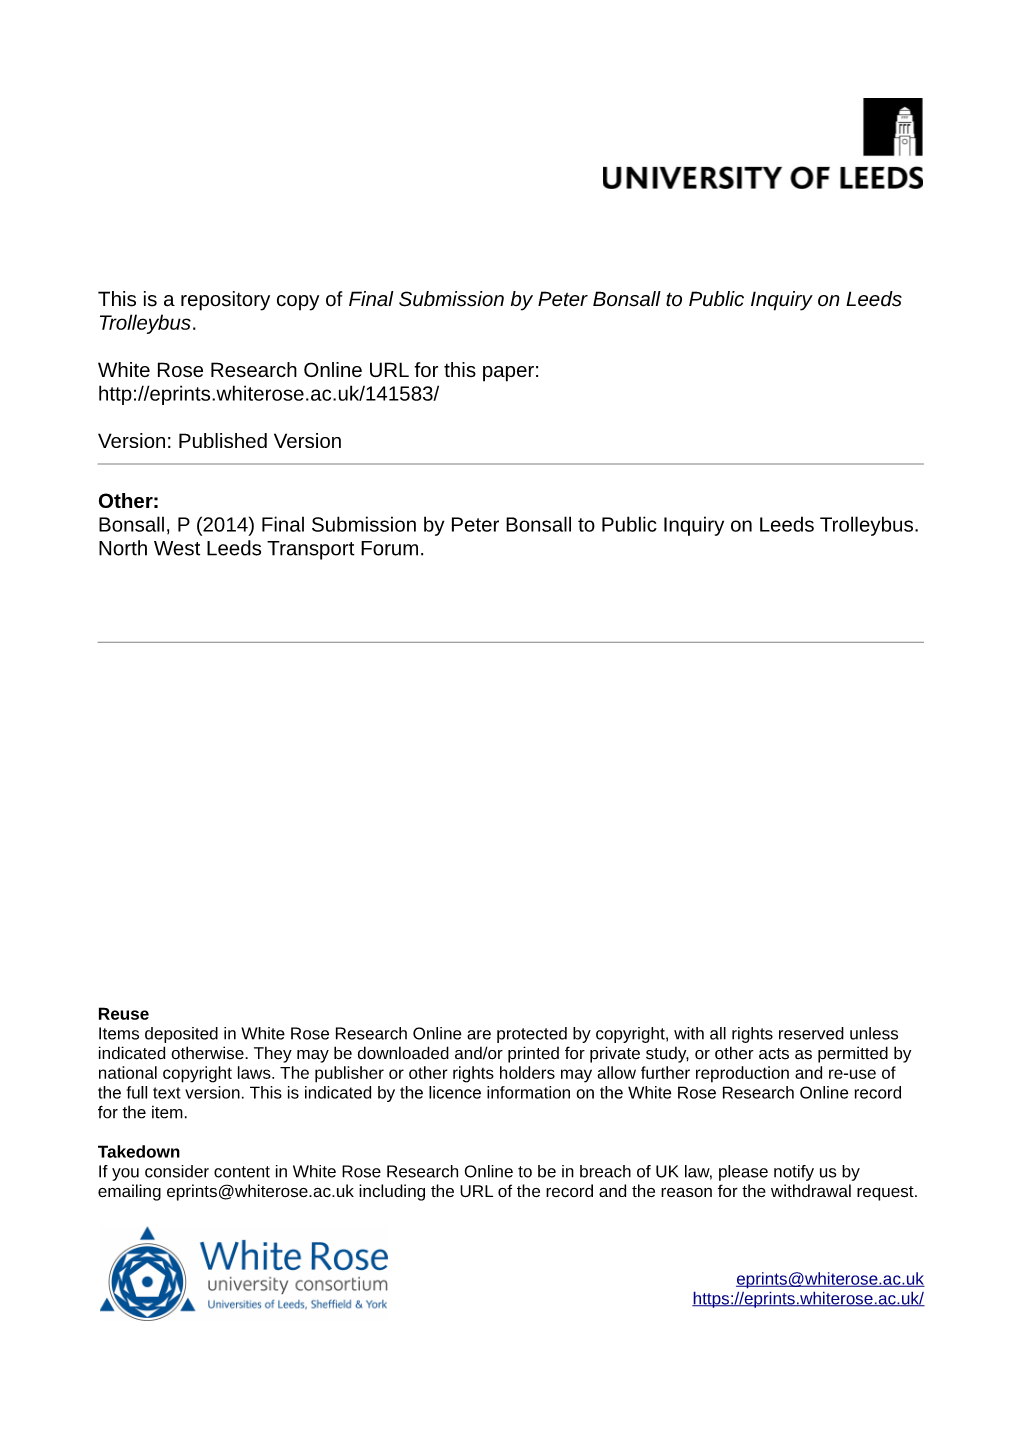 Final Submission by Peter Bonsall to Public Inquiry on Leeds Trolleybus